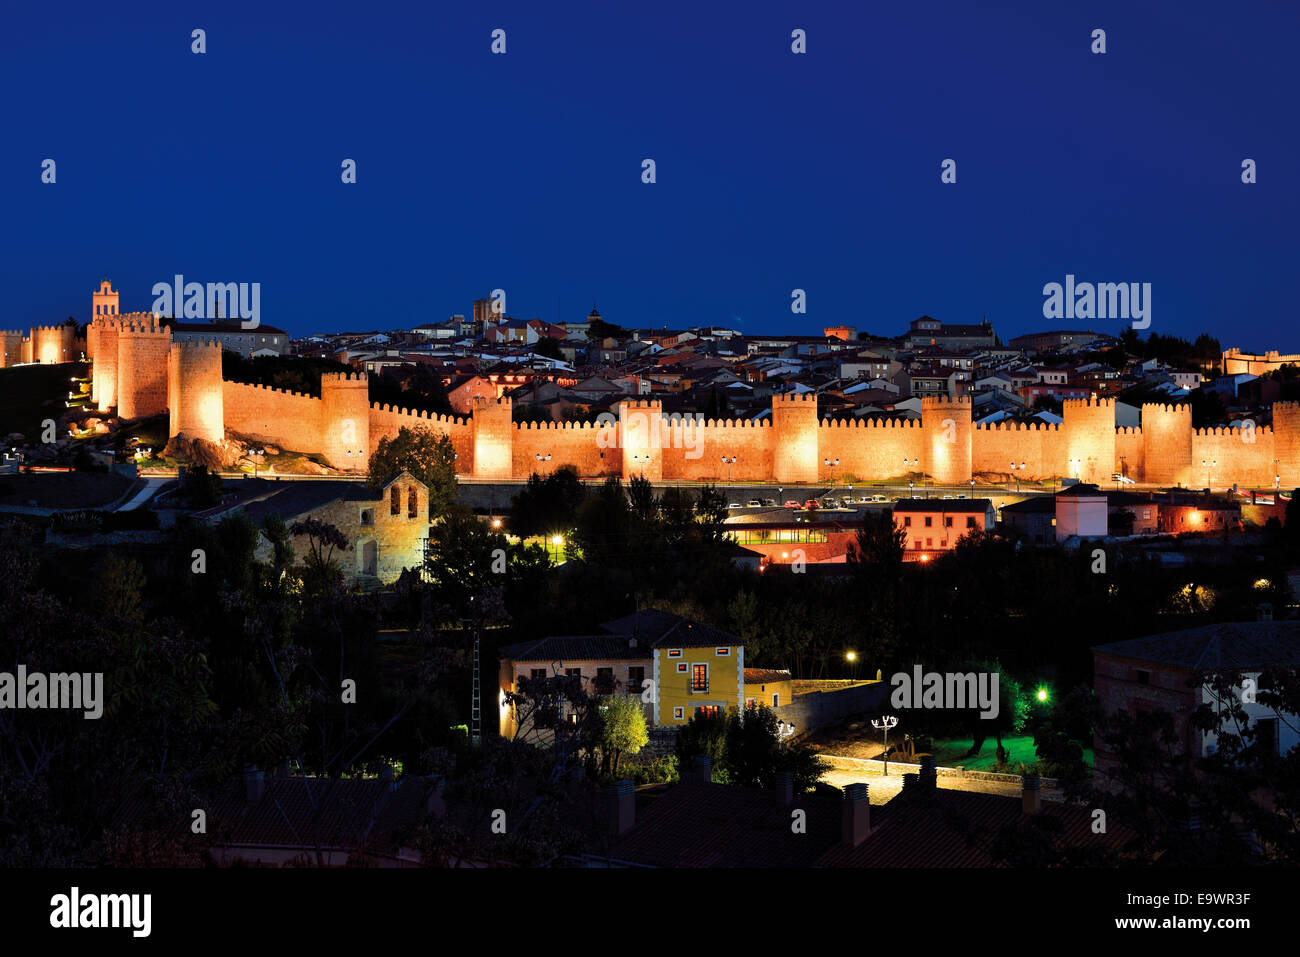 Spain, Castilla-Leon: Nocturnal view of the medieval town wall and historic city Ávila Stock Photo